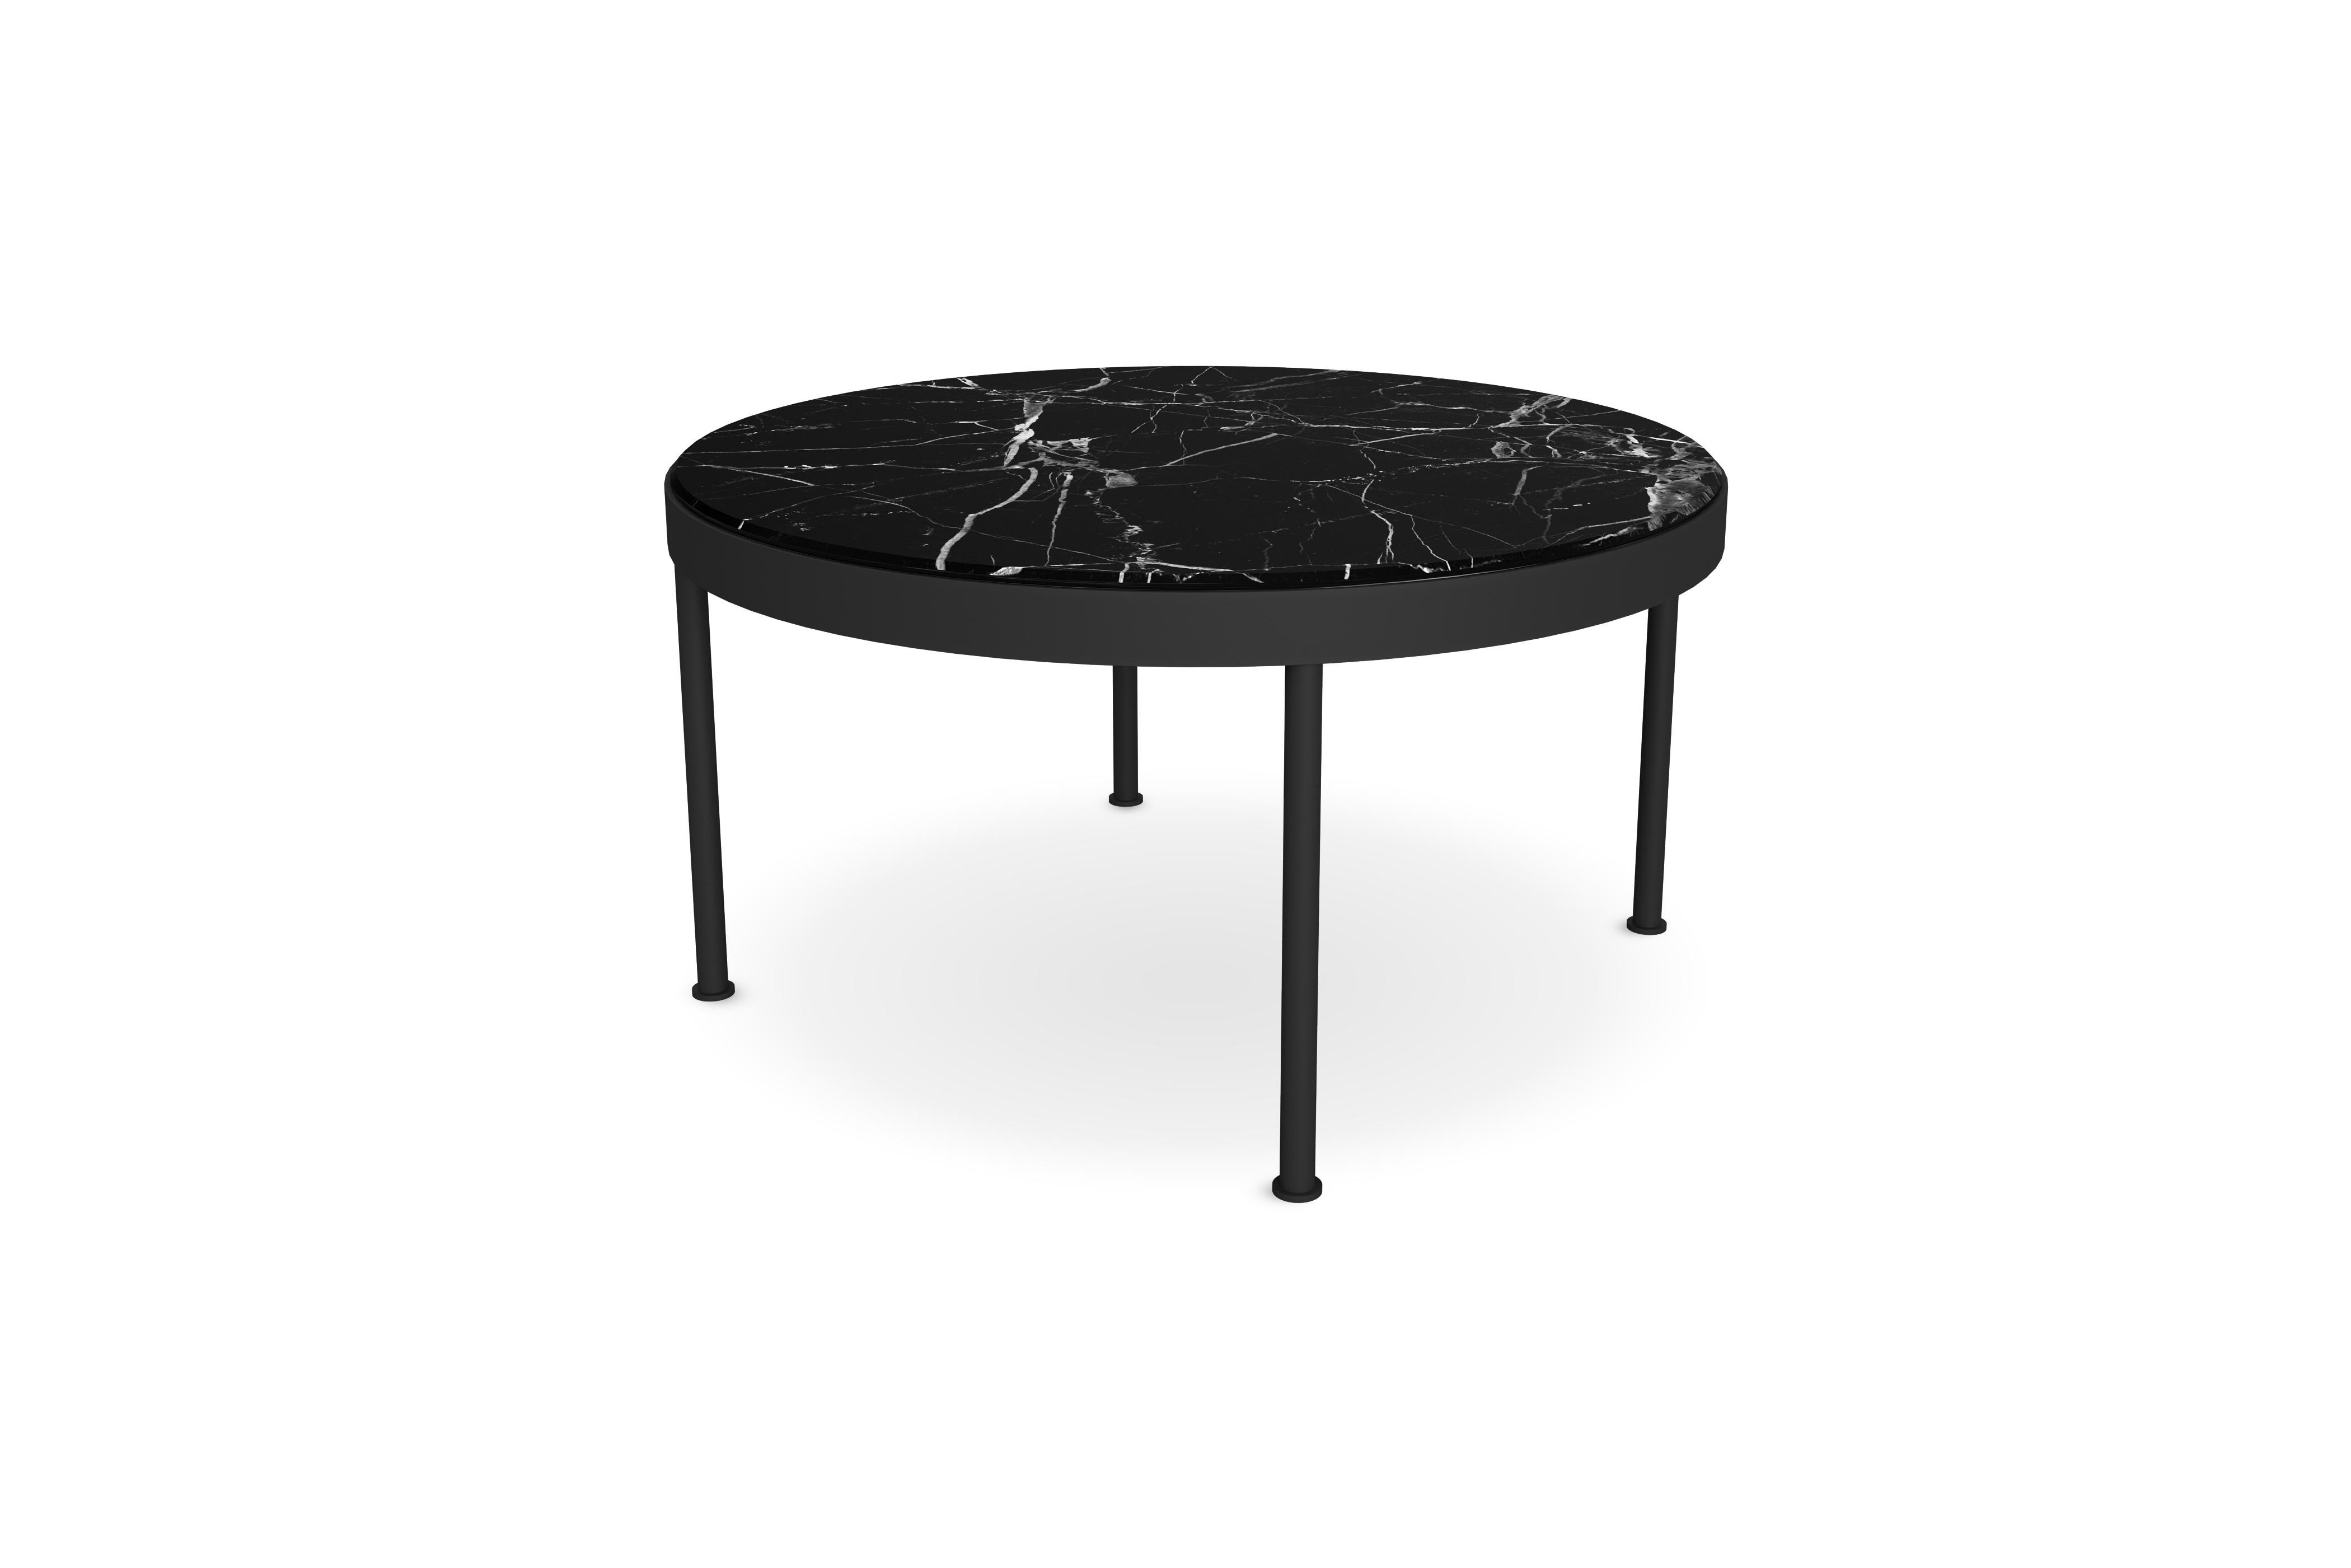 Trace outdoor center table big 

The Trace outdoor center table is the perfect furniture piece to complement any outdoor lounge space and concede it a modern and sophisticated touch. It goes beautifully with the remaining pieces of the